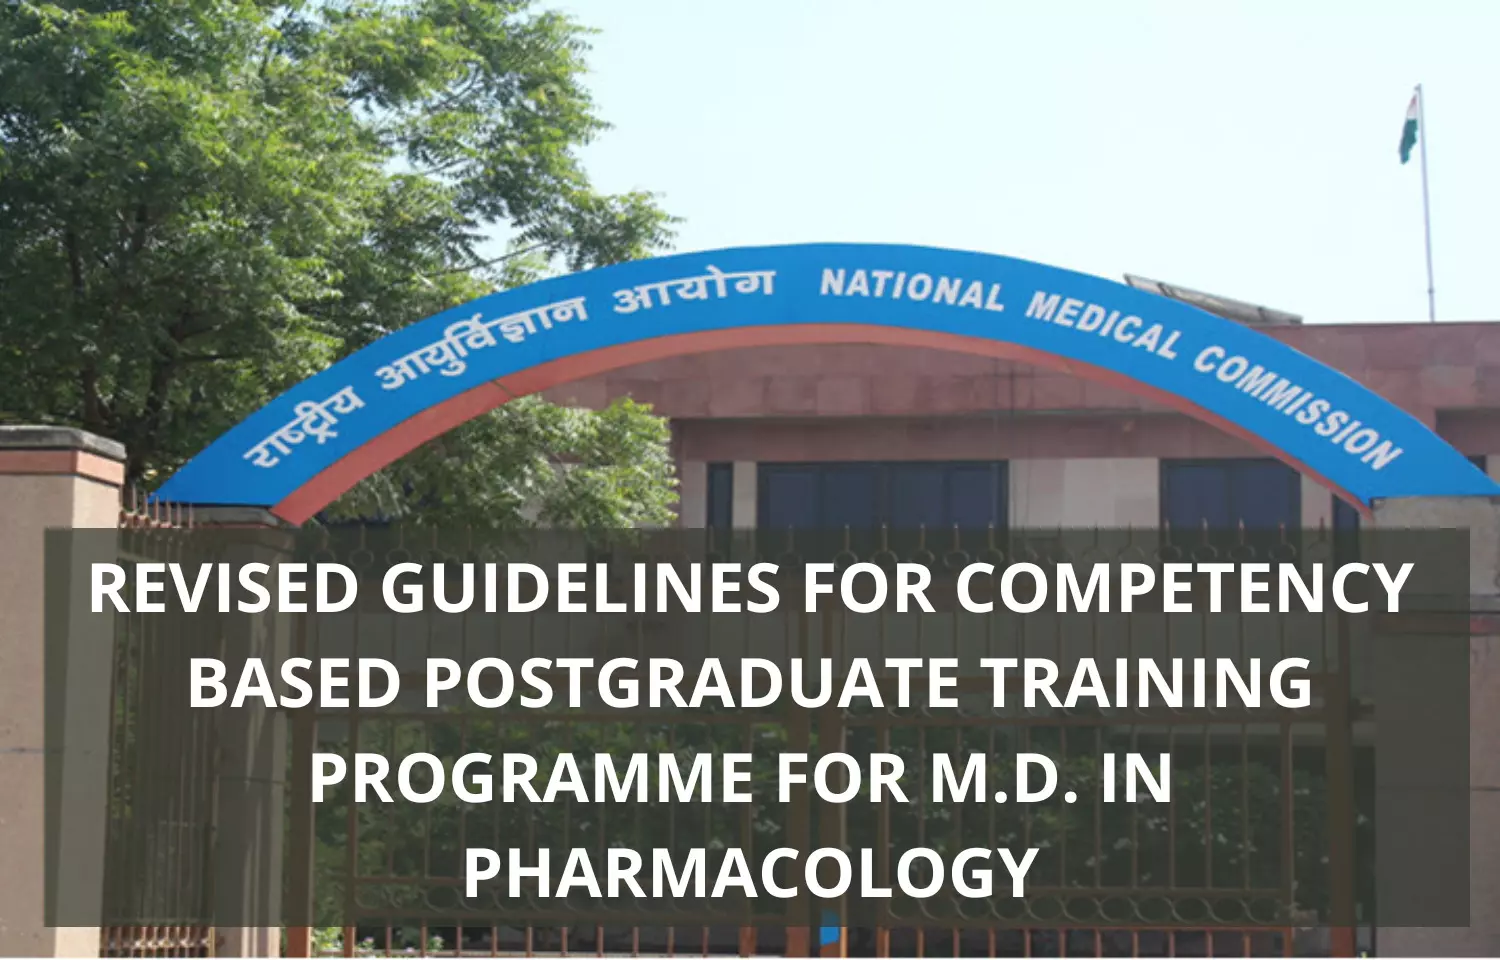 NMC releases revised Guidelines For Competency Based Postgraduate Training Programme For MD Pharmacology